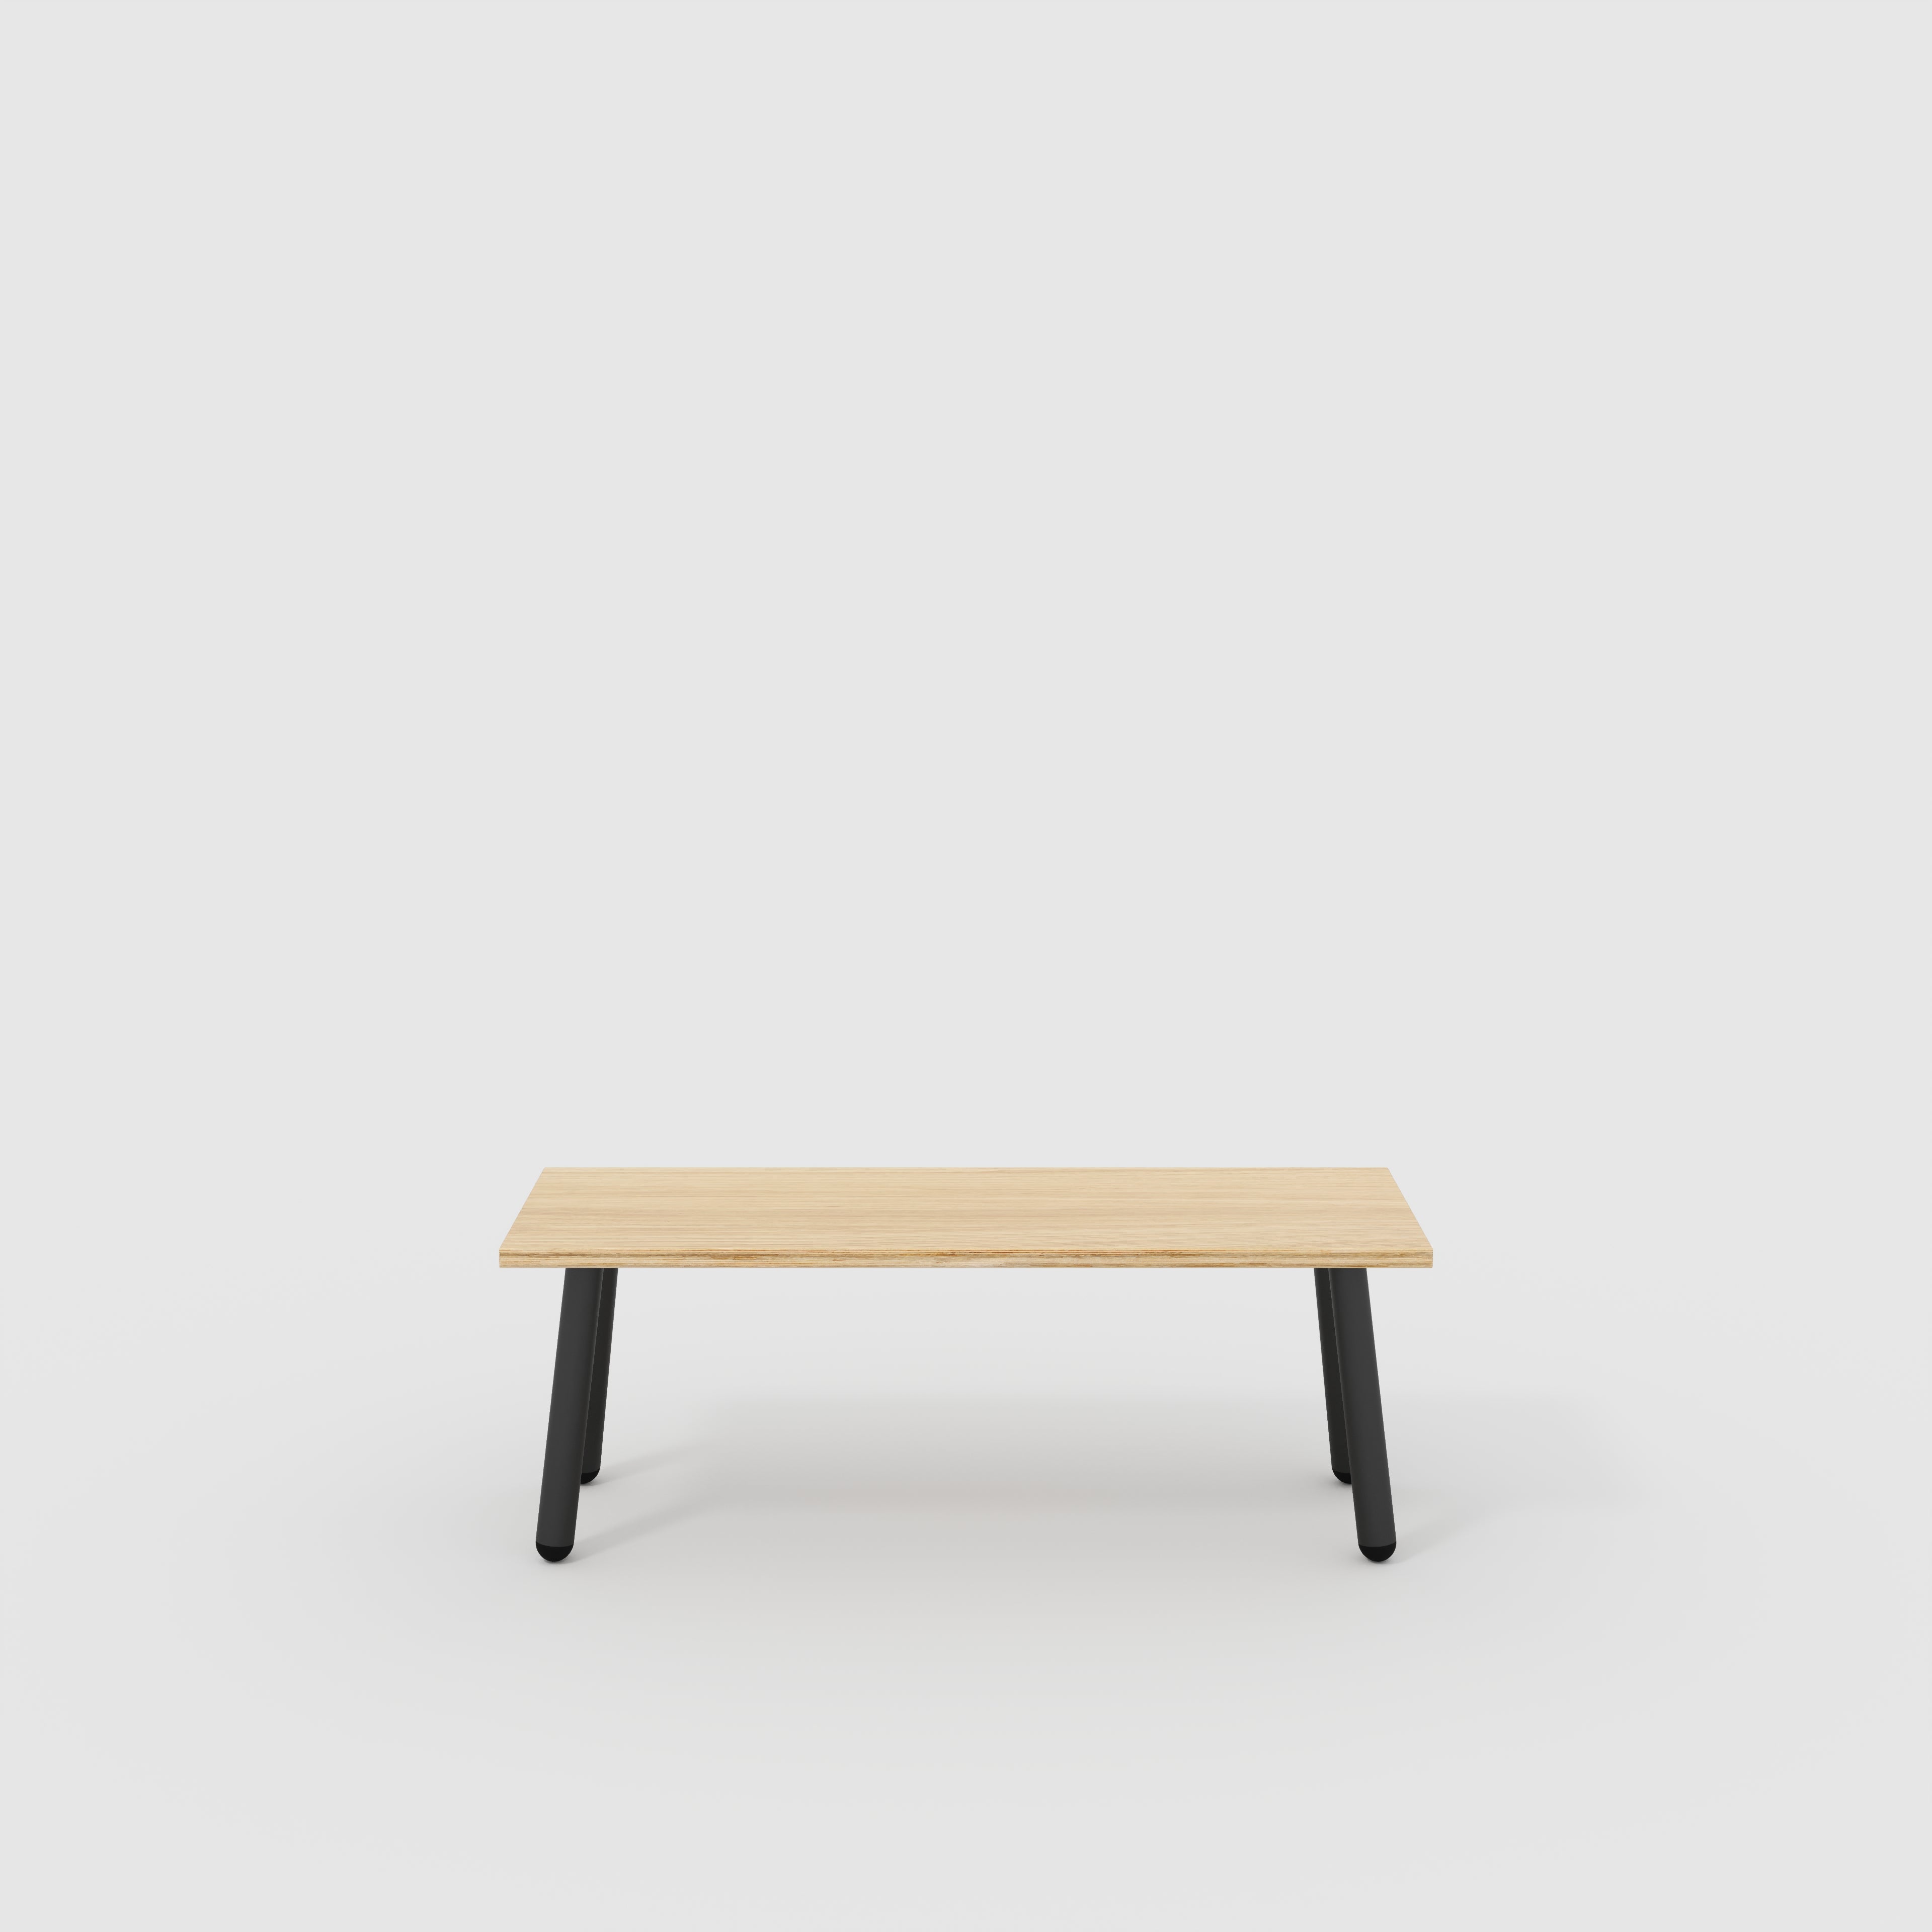 Bench Seat with Black Round Single Pin Legs - Plywood Oak - 1200(w) x 400(d)